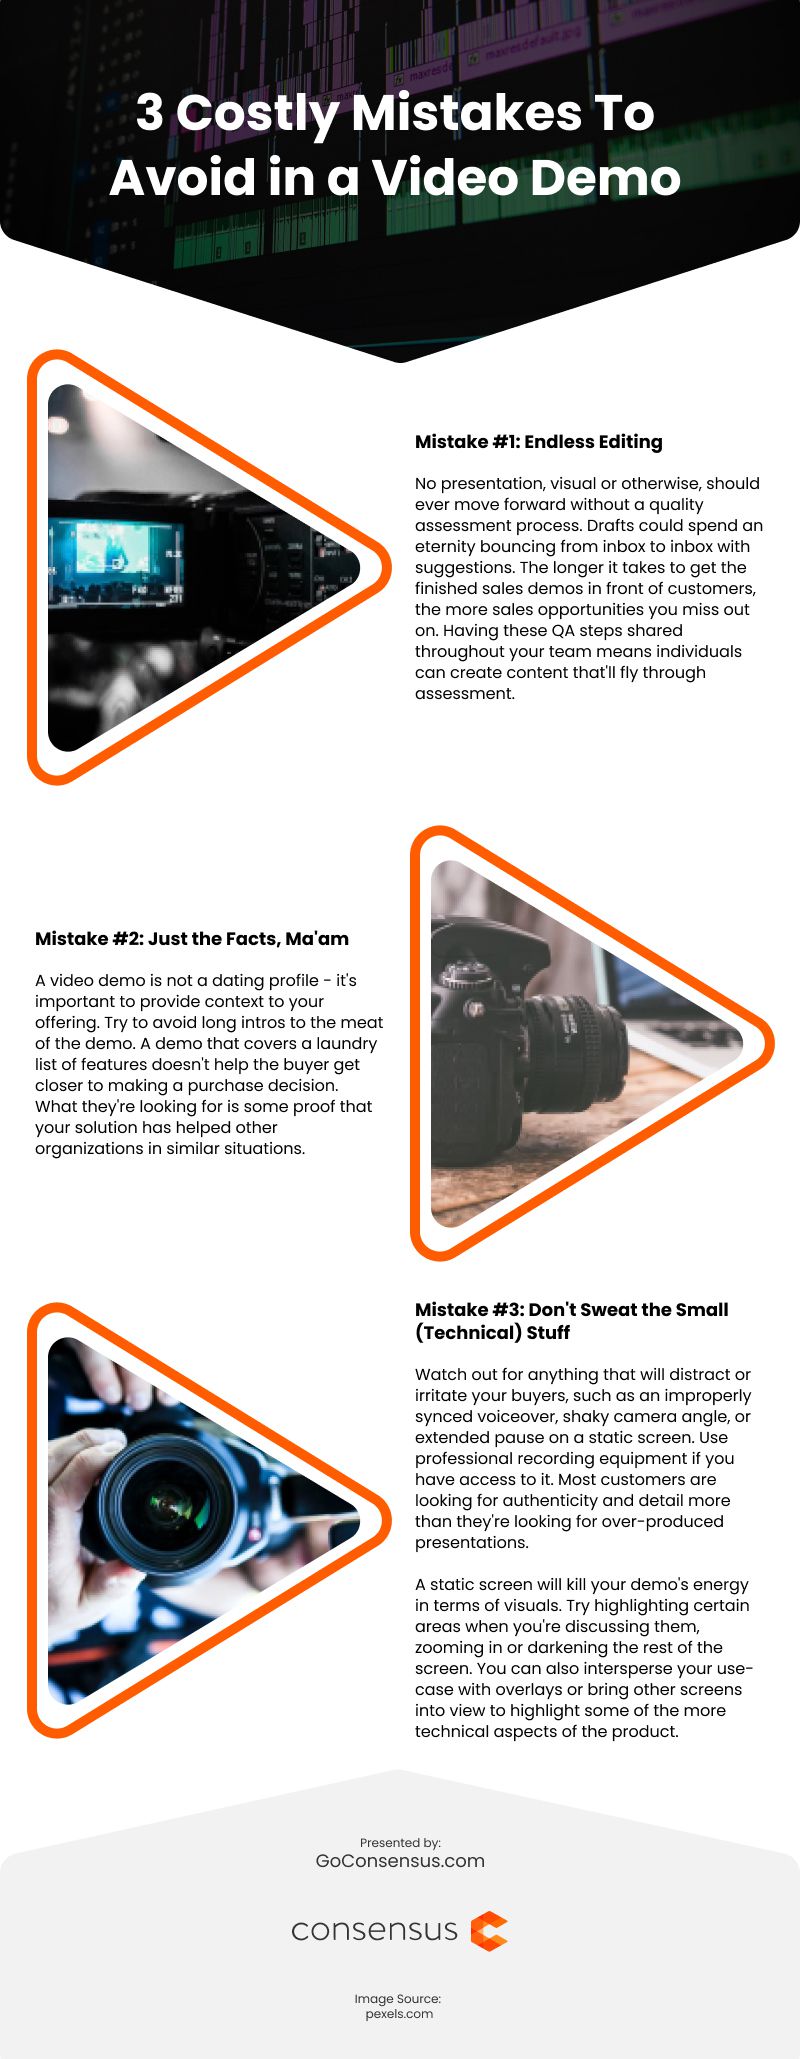 3 Costly Mistakes To Avoid in a Video Demo Infographic